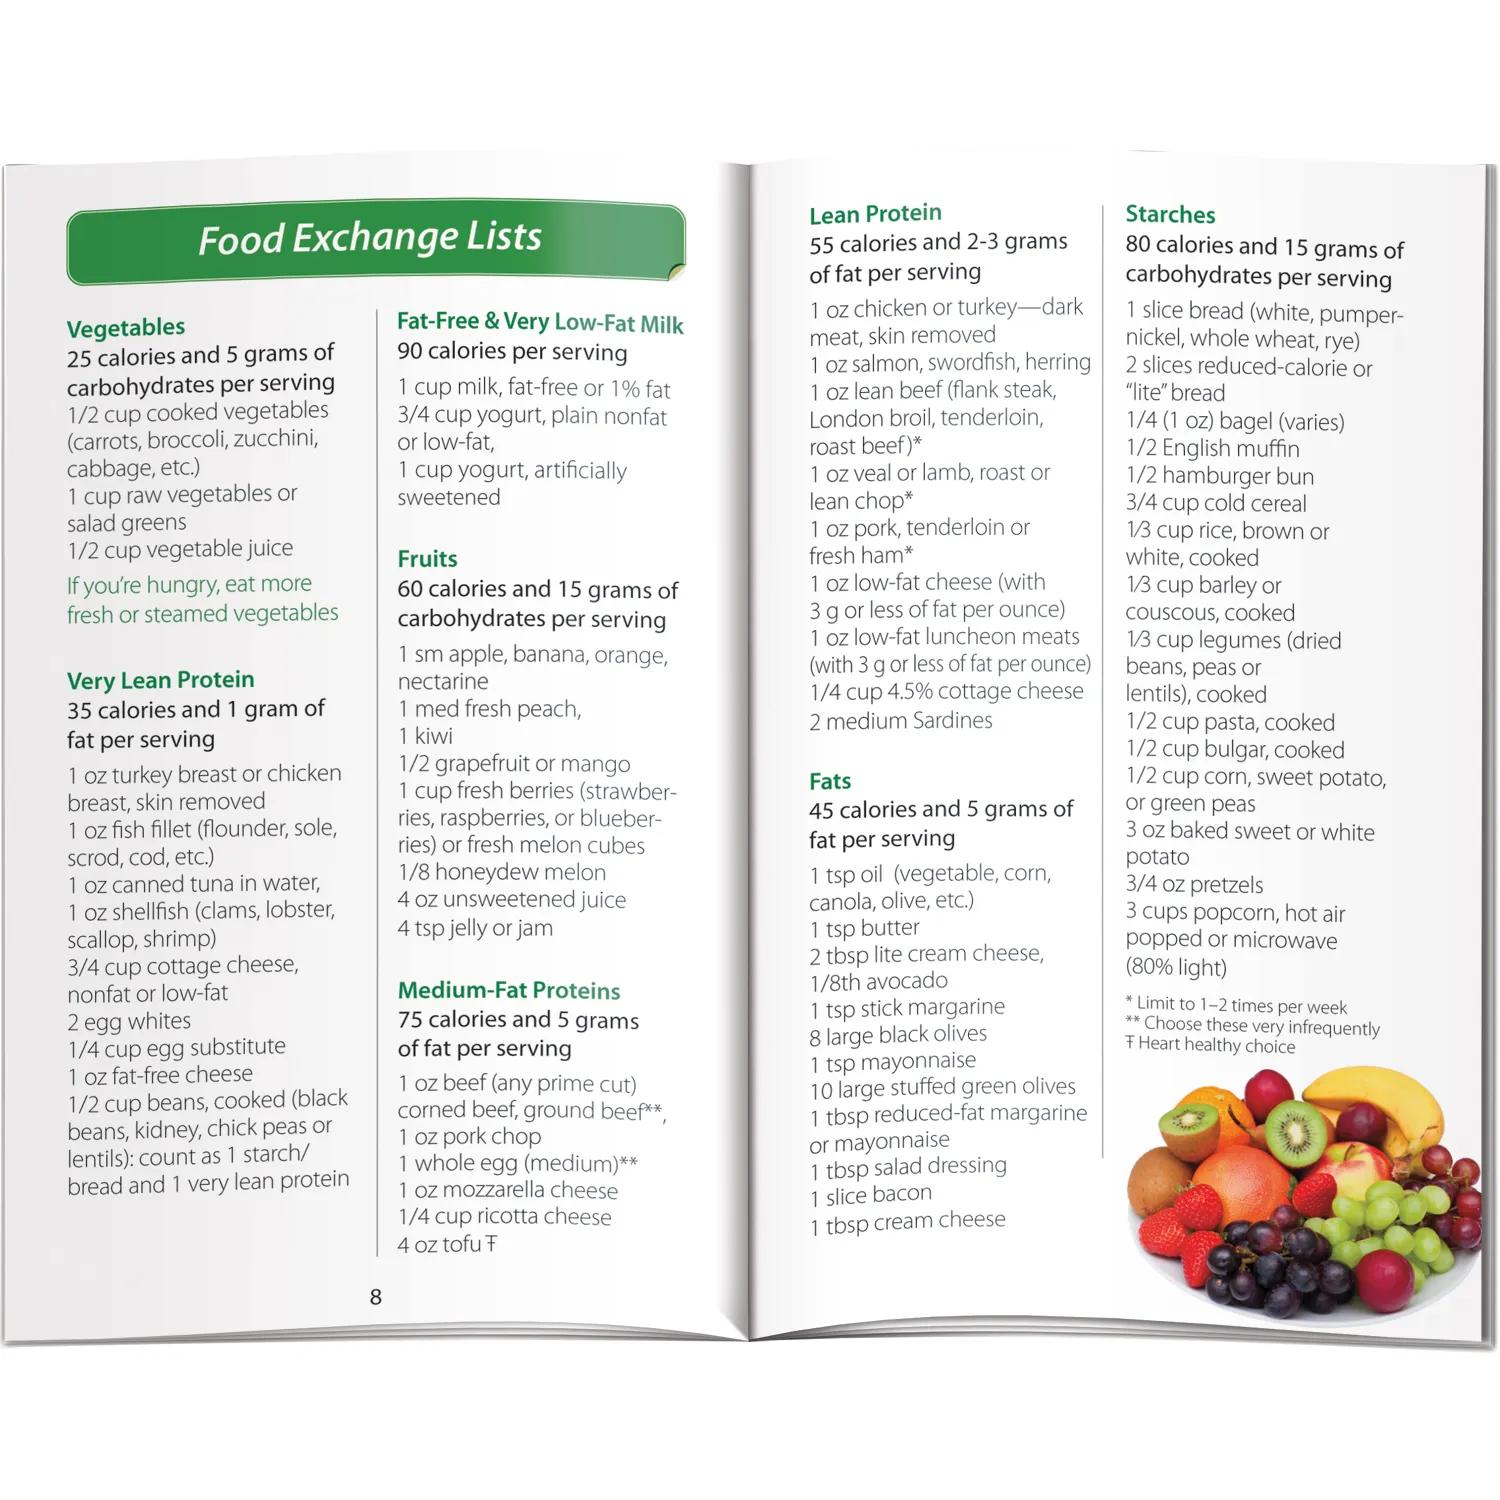 Better Book: Diabetes Health: Meal Planner/Recipes 4 of 5